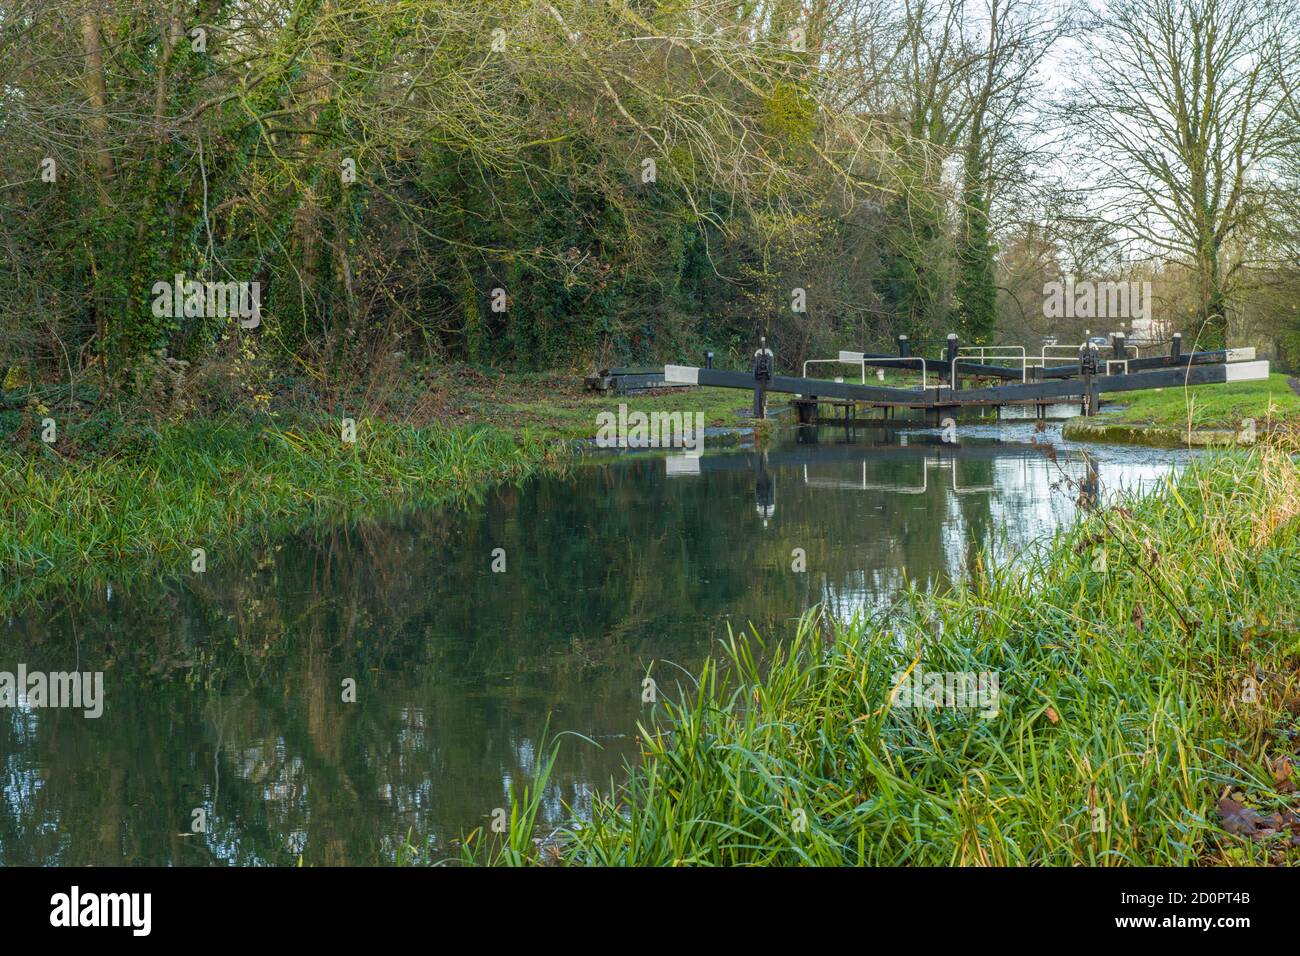 The Stroud and Stonehouse Canal near Stonehouse in Gloucestershire, England, UK photographed in November, Winter. Stock Photo